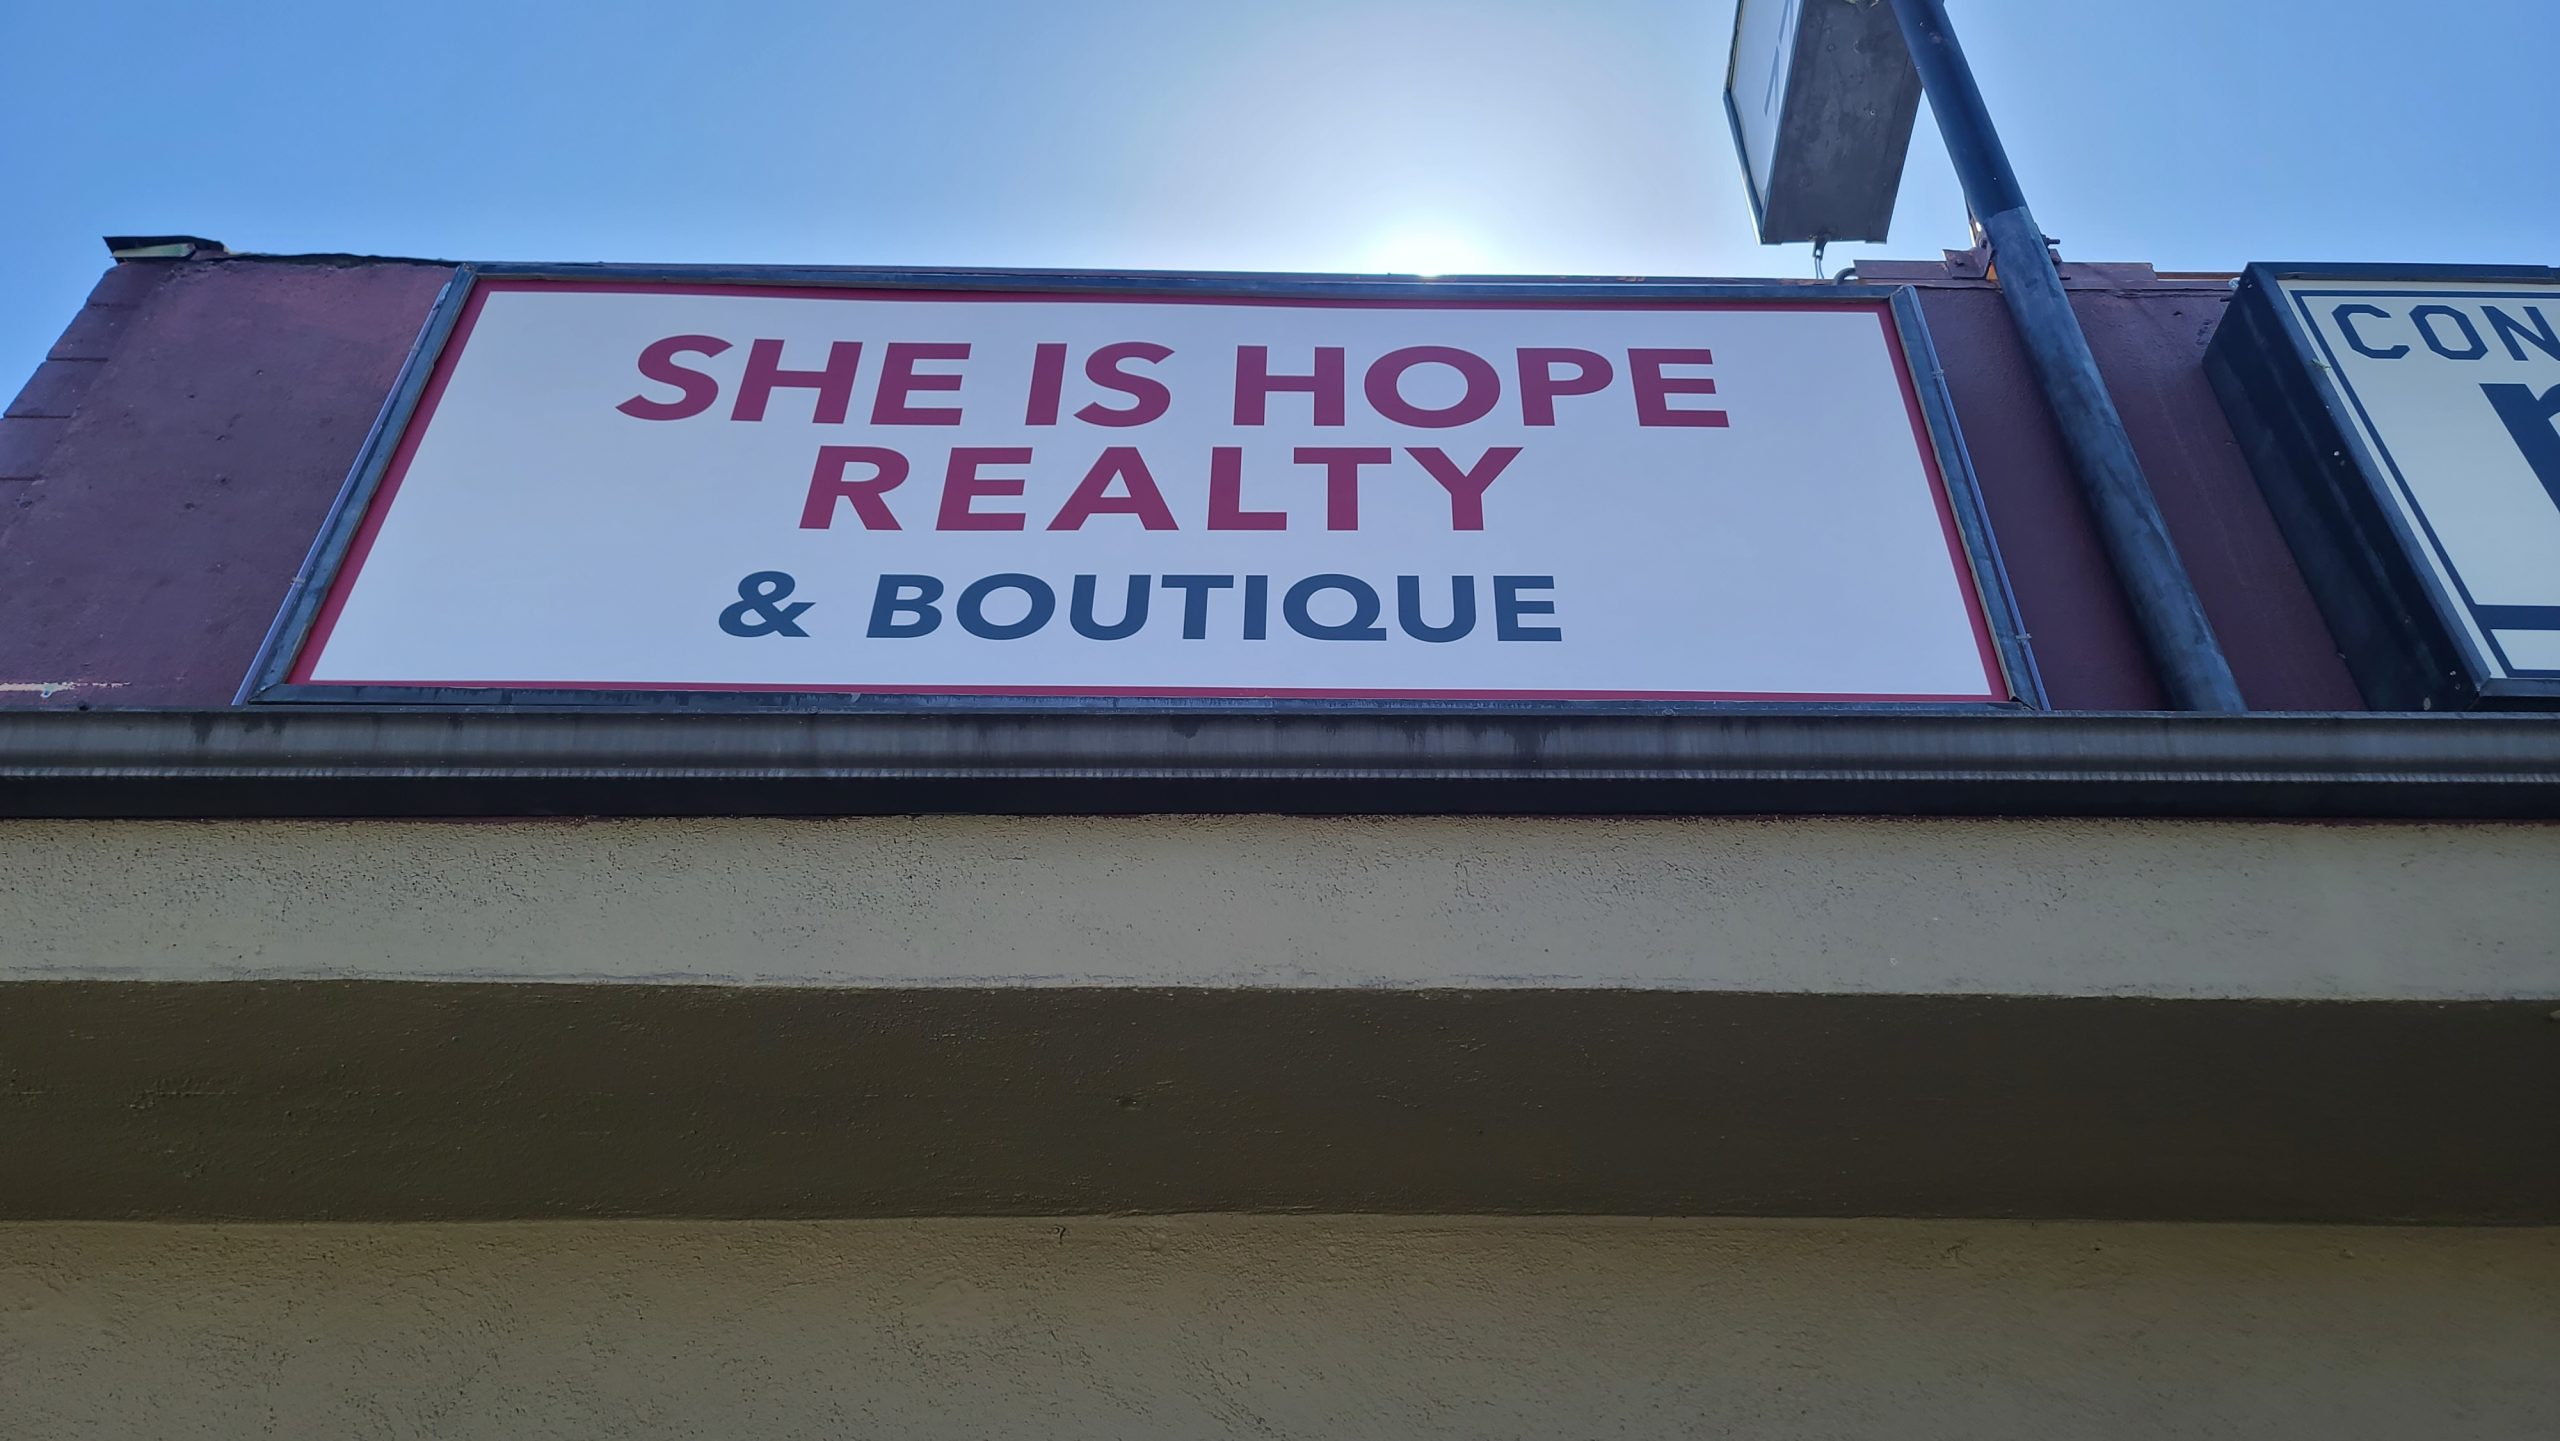 These lightbox inserts are part of storefront design package for She is Hope Realty & Boutique in Encino.